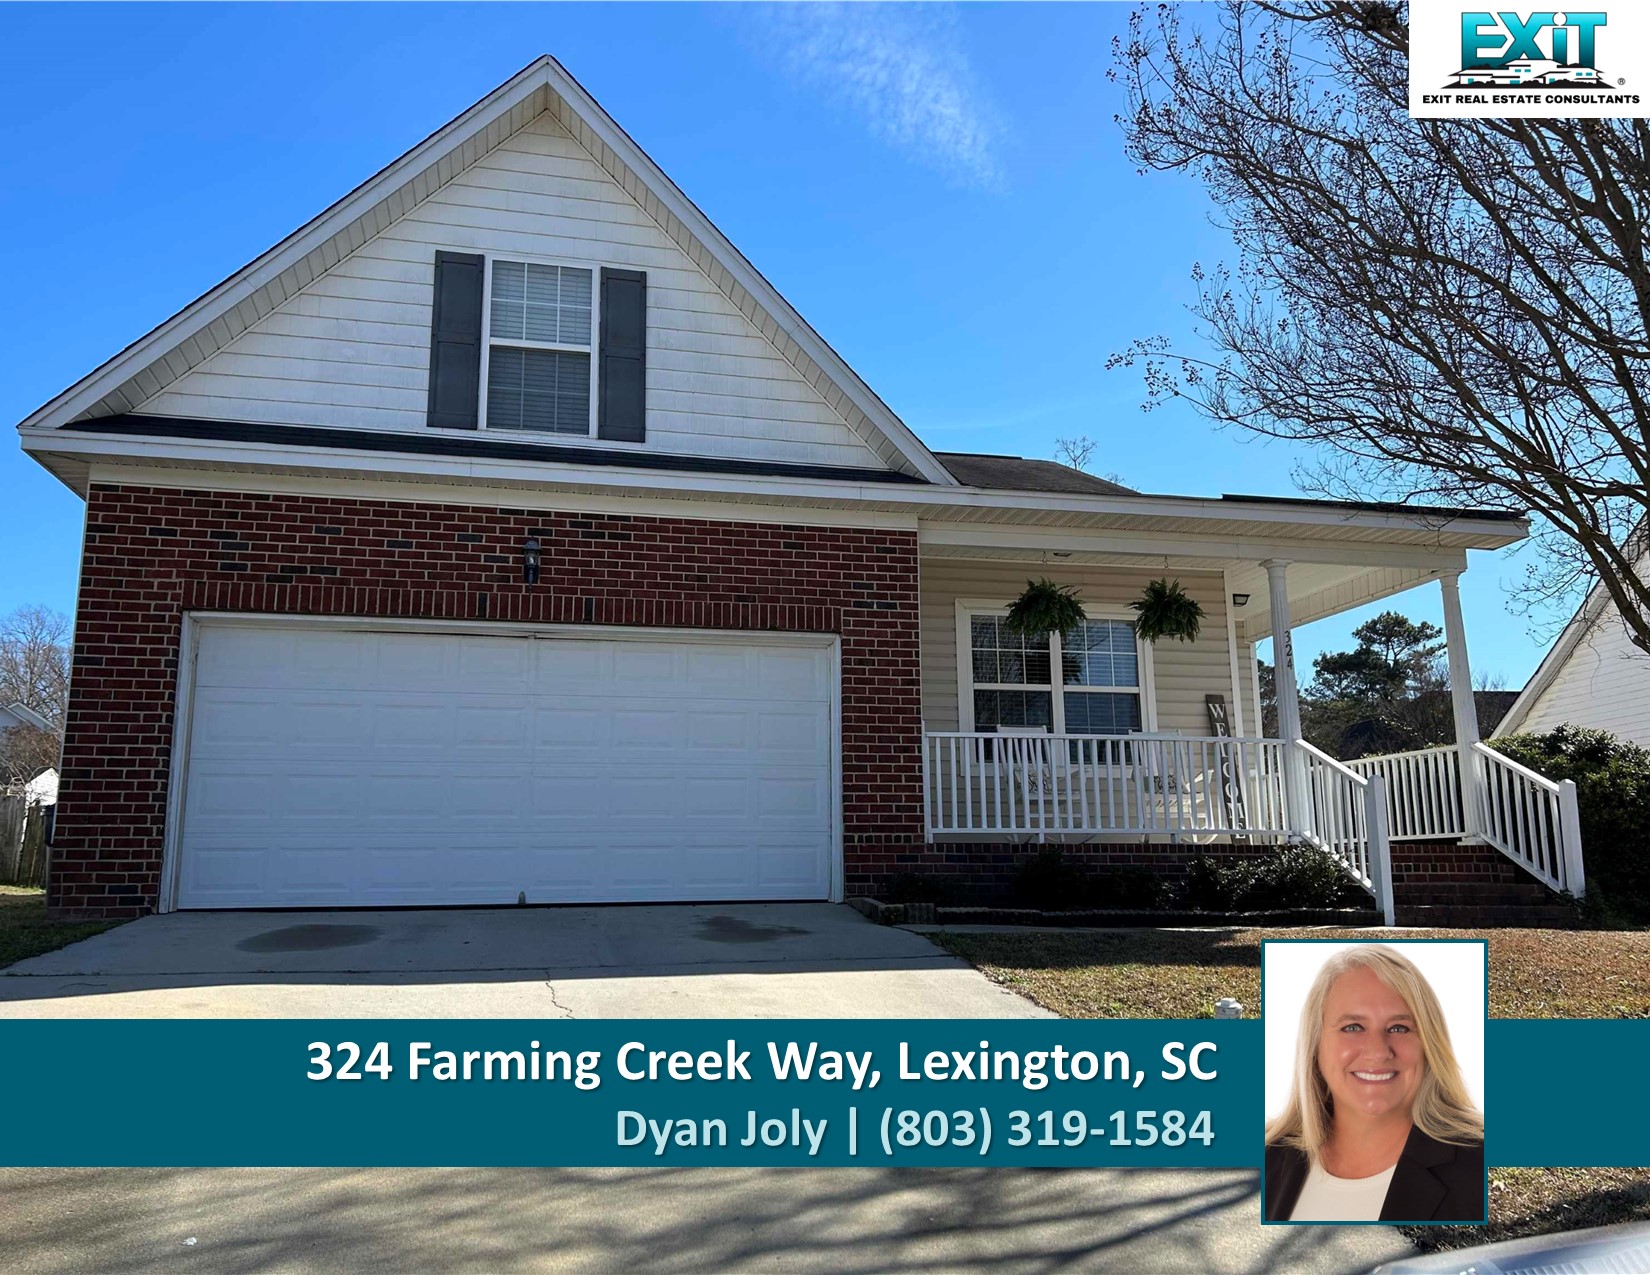 Just listed in Farming Creek